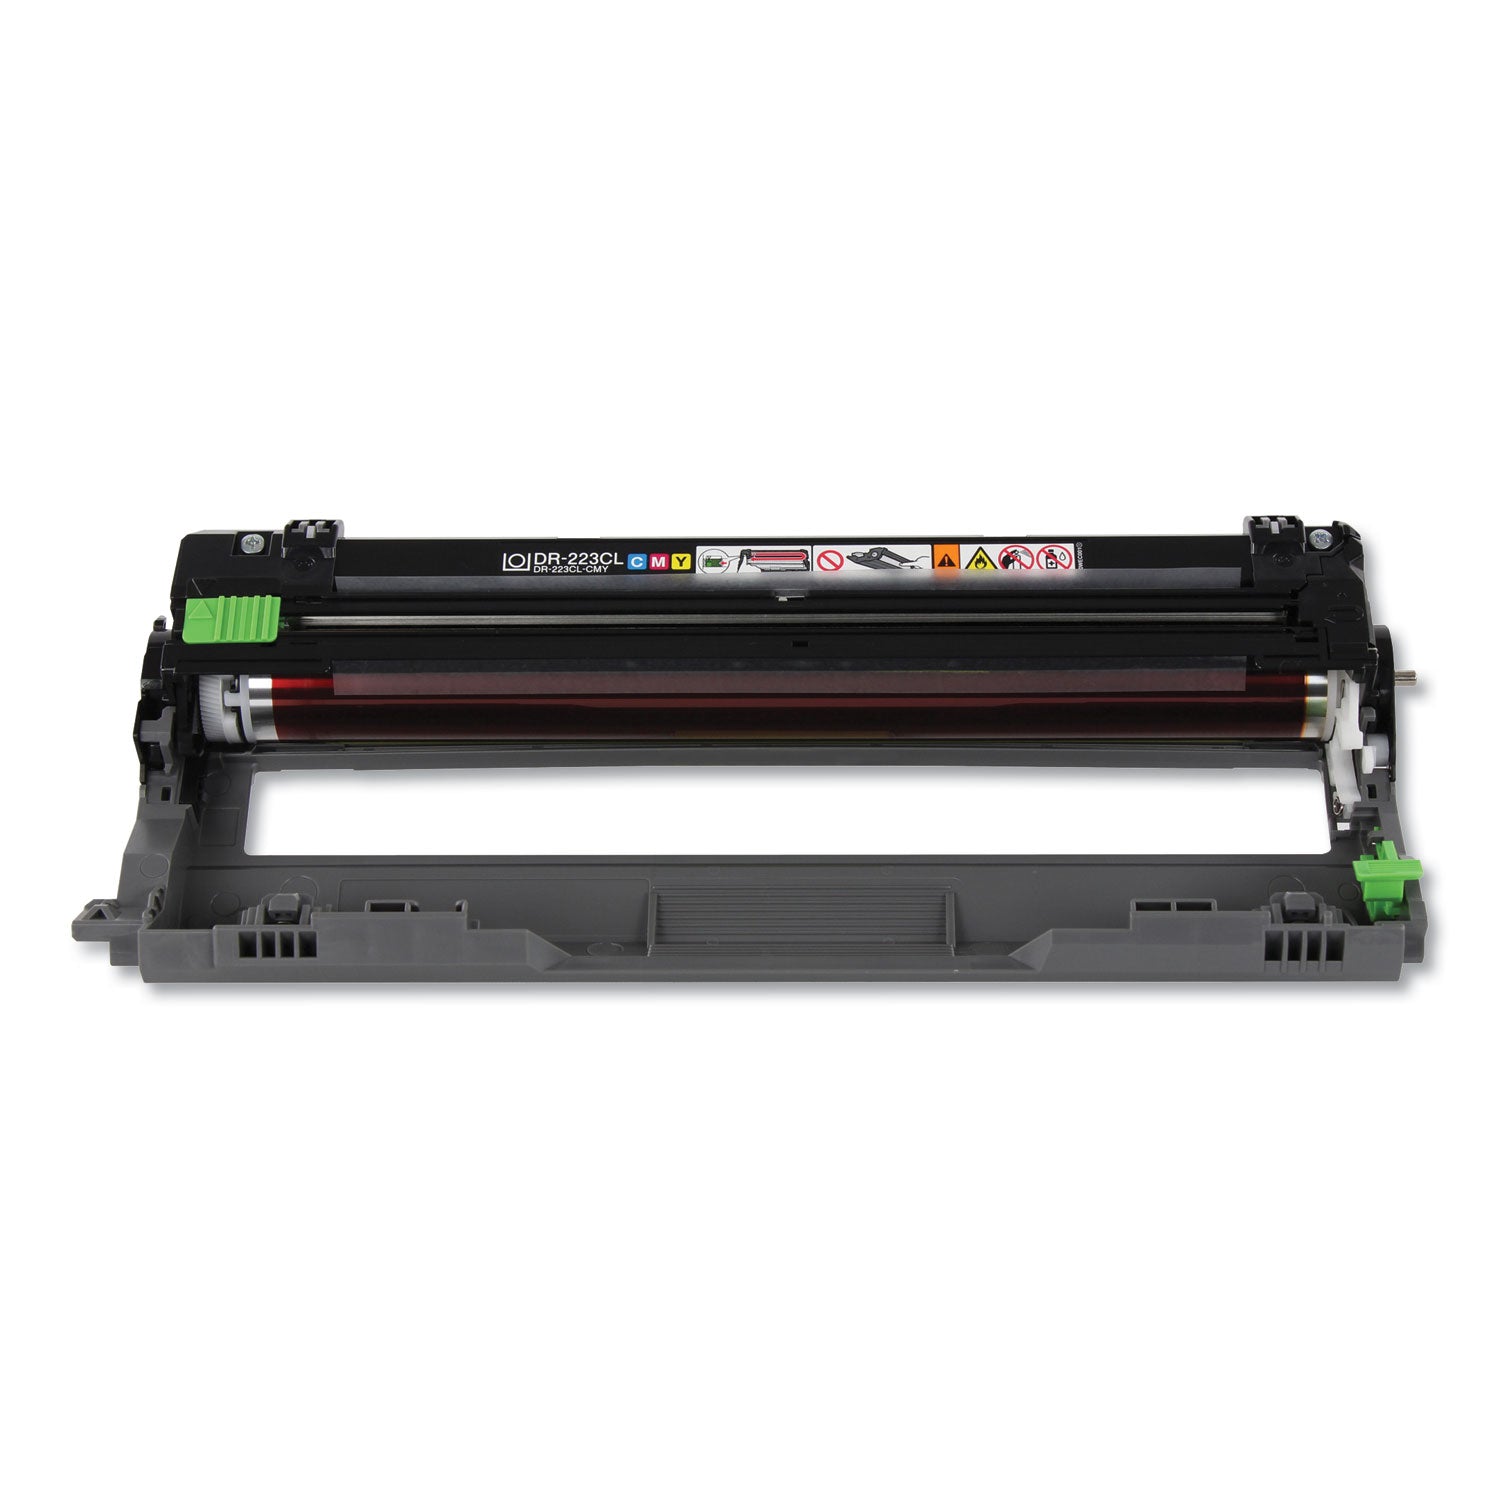 dr223cl-drum-unit-18000-page-yield-black-cyan-magenta-yellow_brtdr223cl - 4